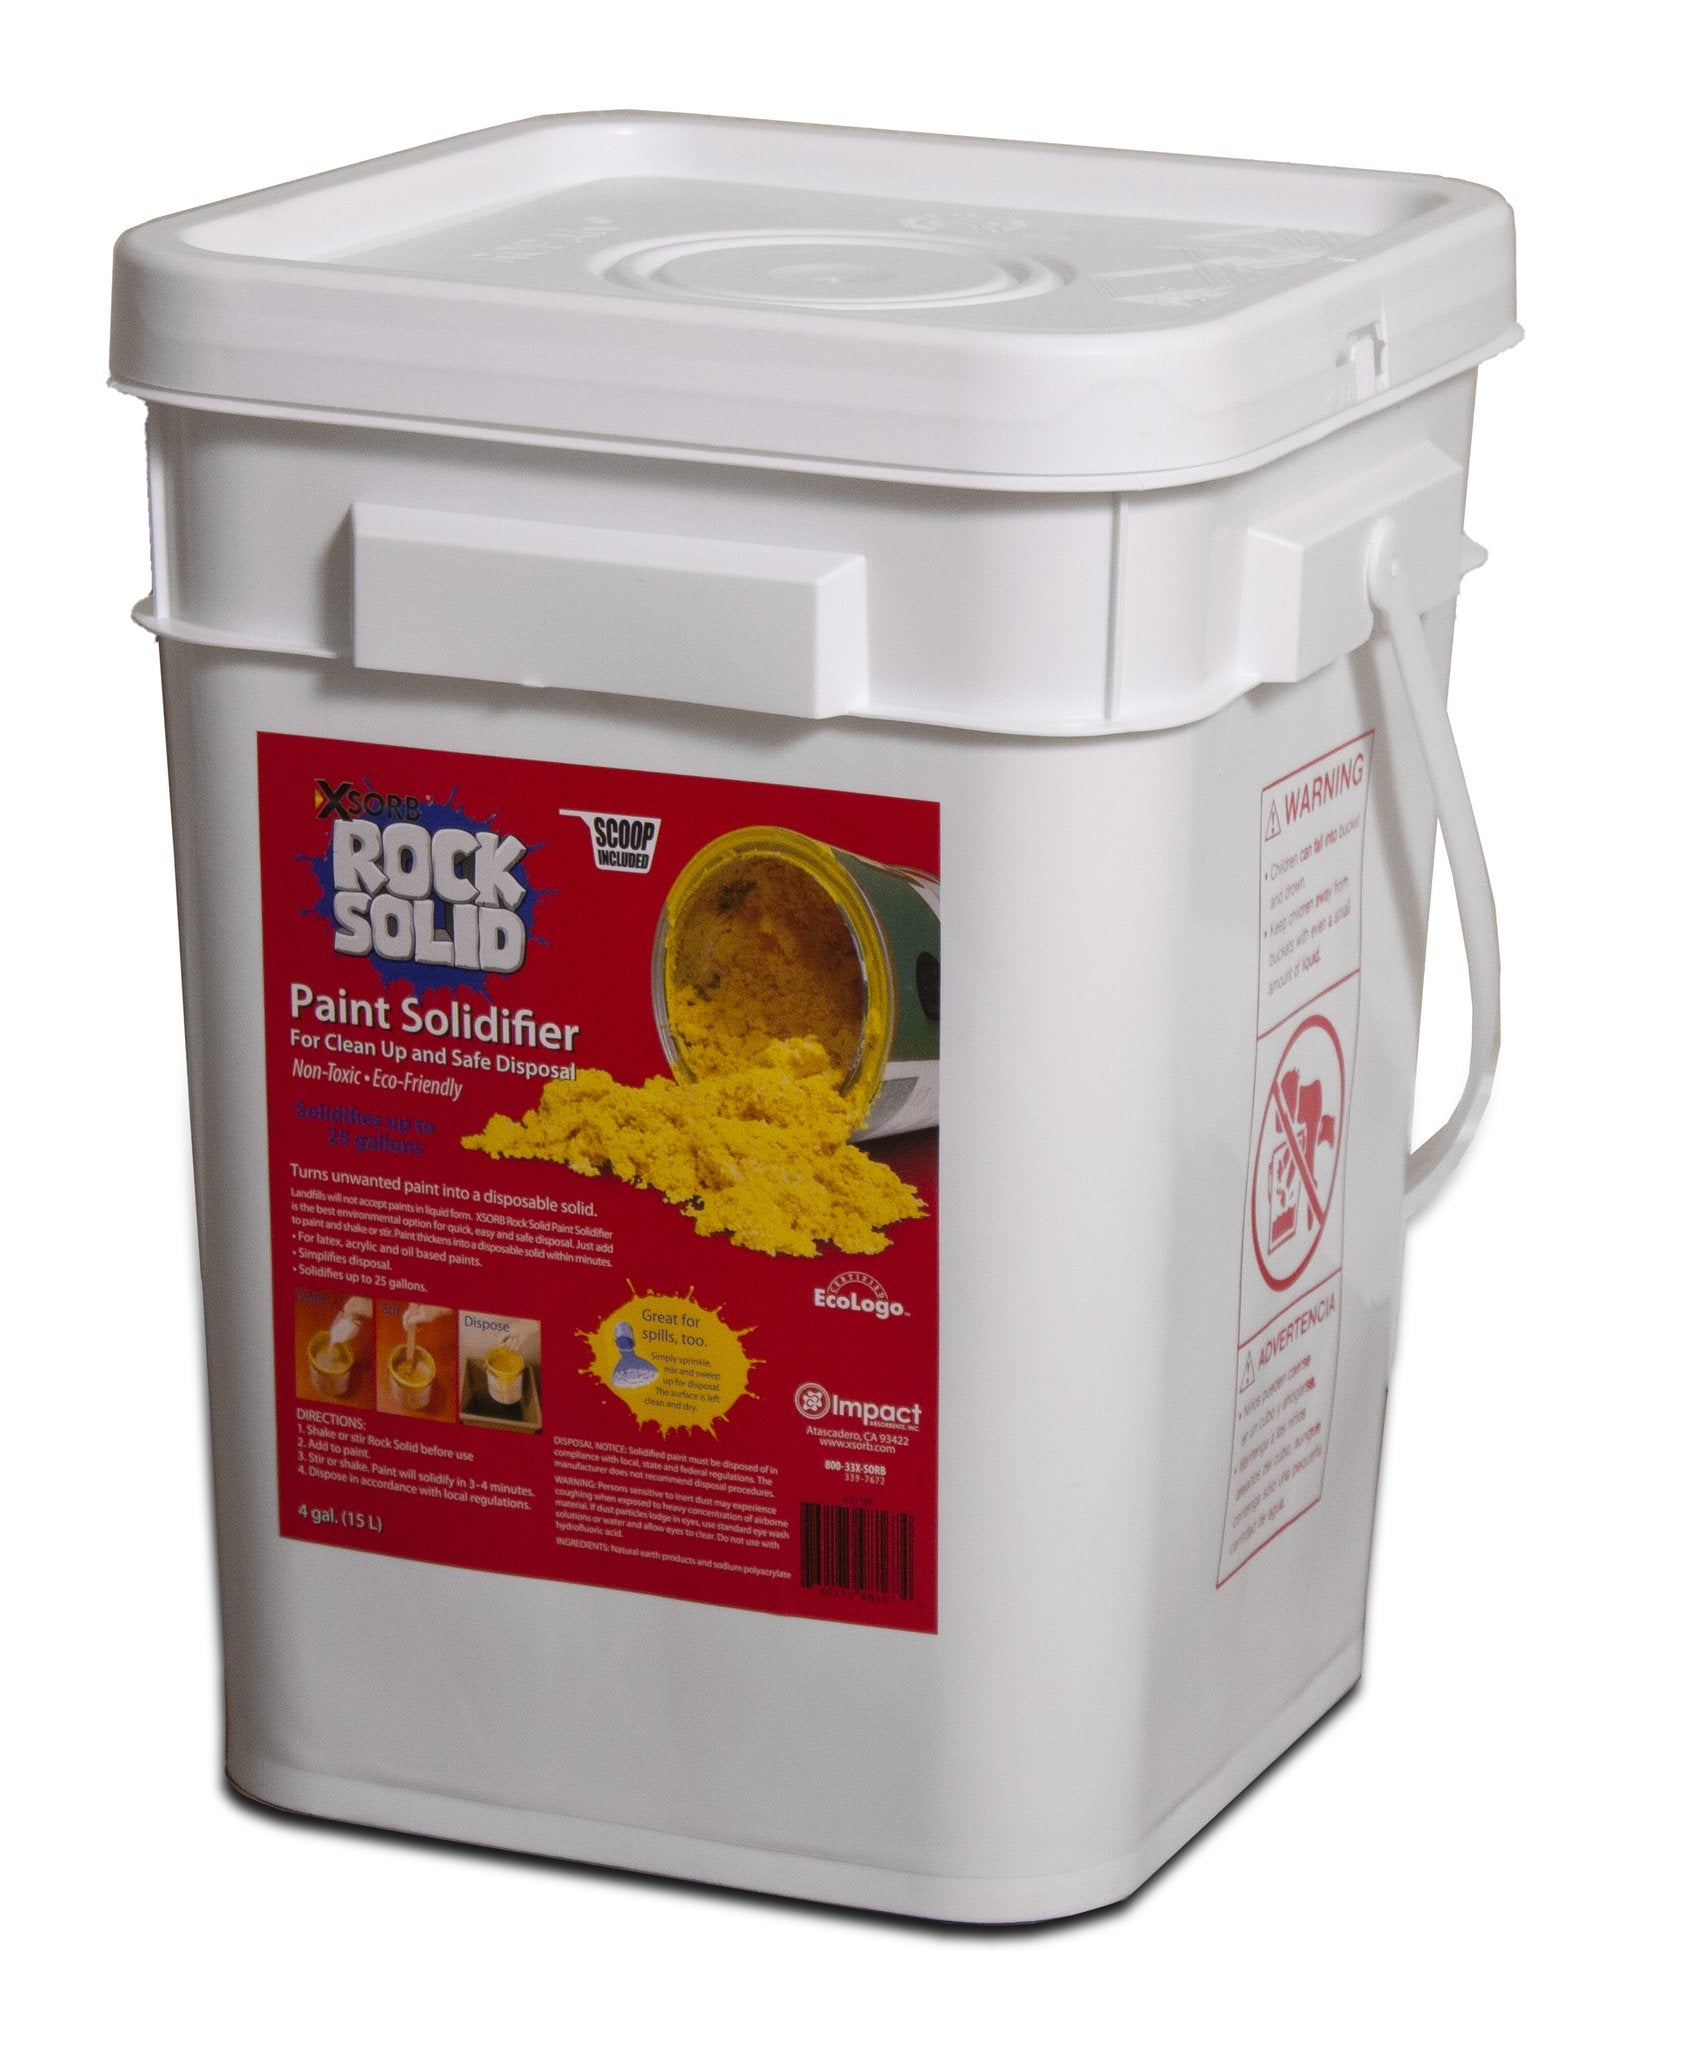 XSORB Rock Solid Paint Hardener Pail 4 gal. with Scoop - 1 PAIL